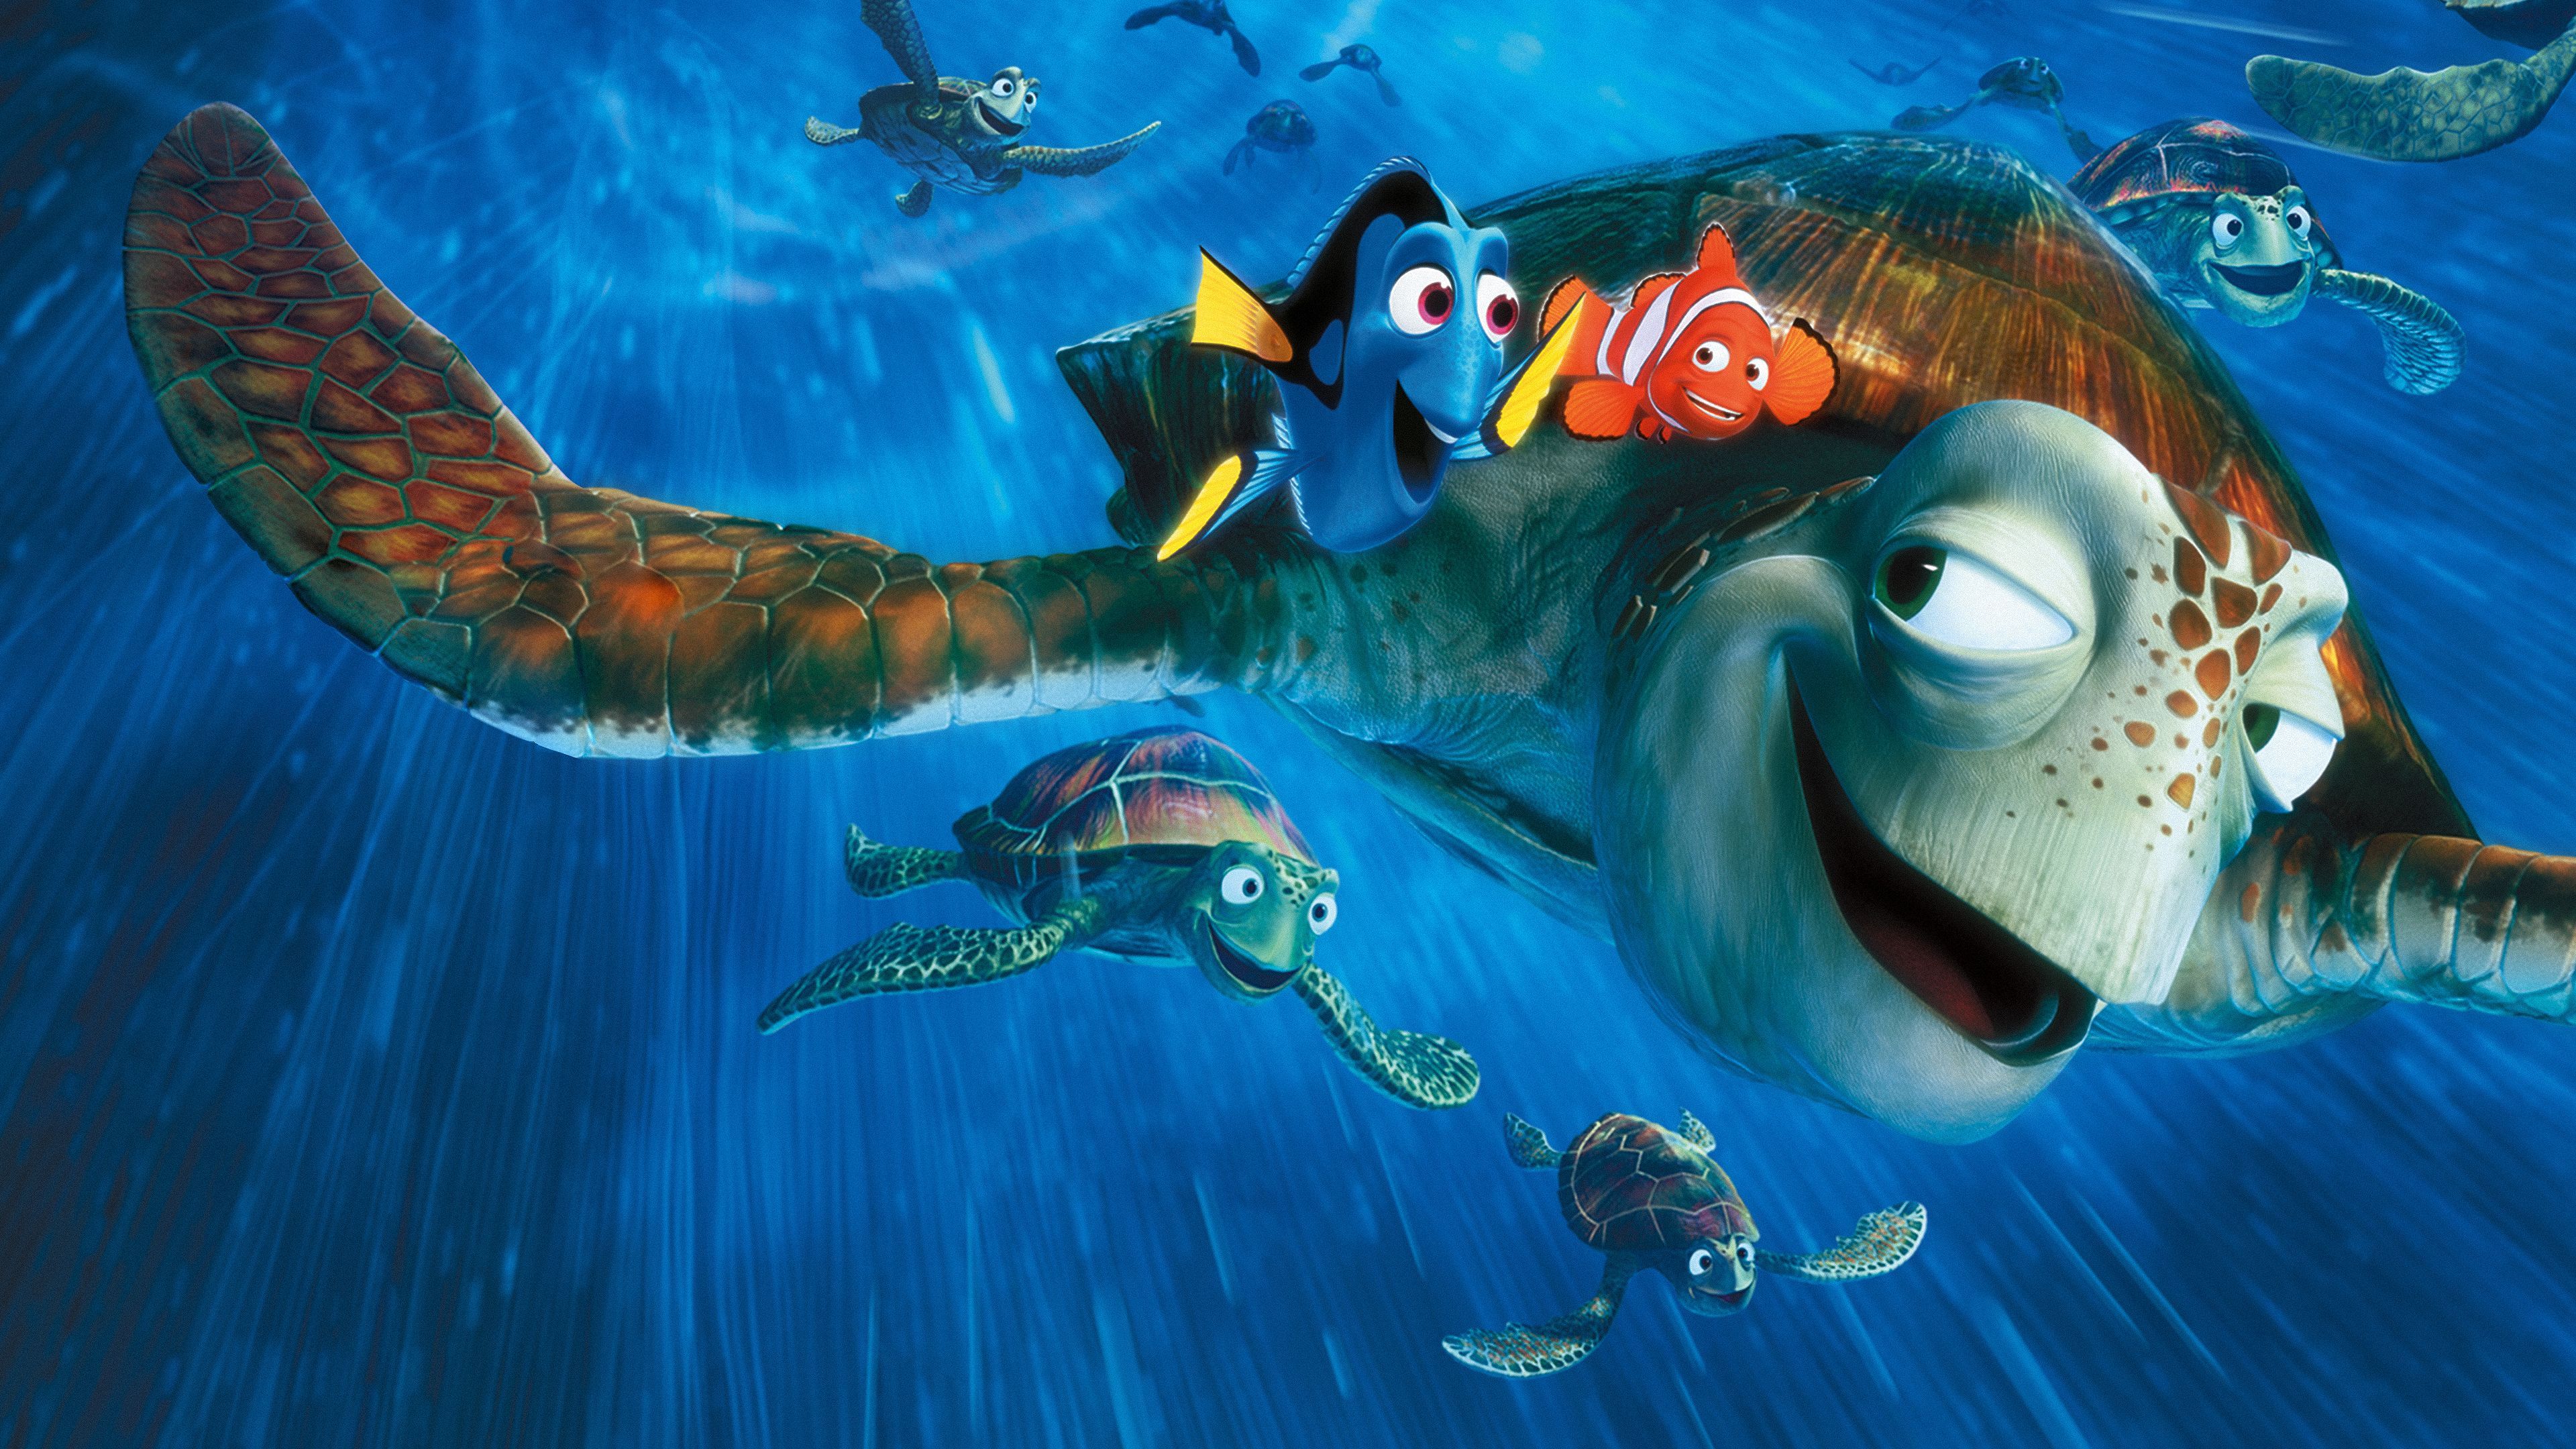 Dory and Marlin embark on a wild adventure to find Marlin's son, Nemo....